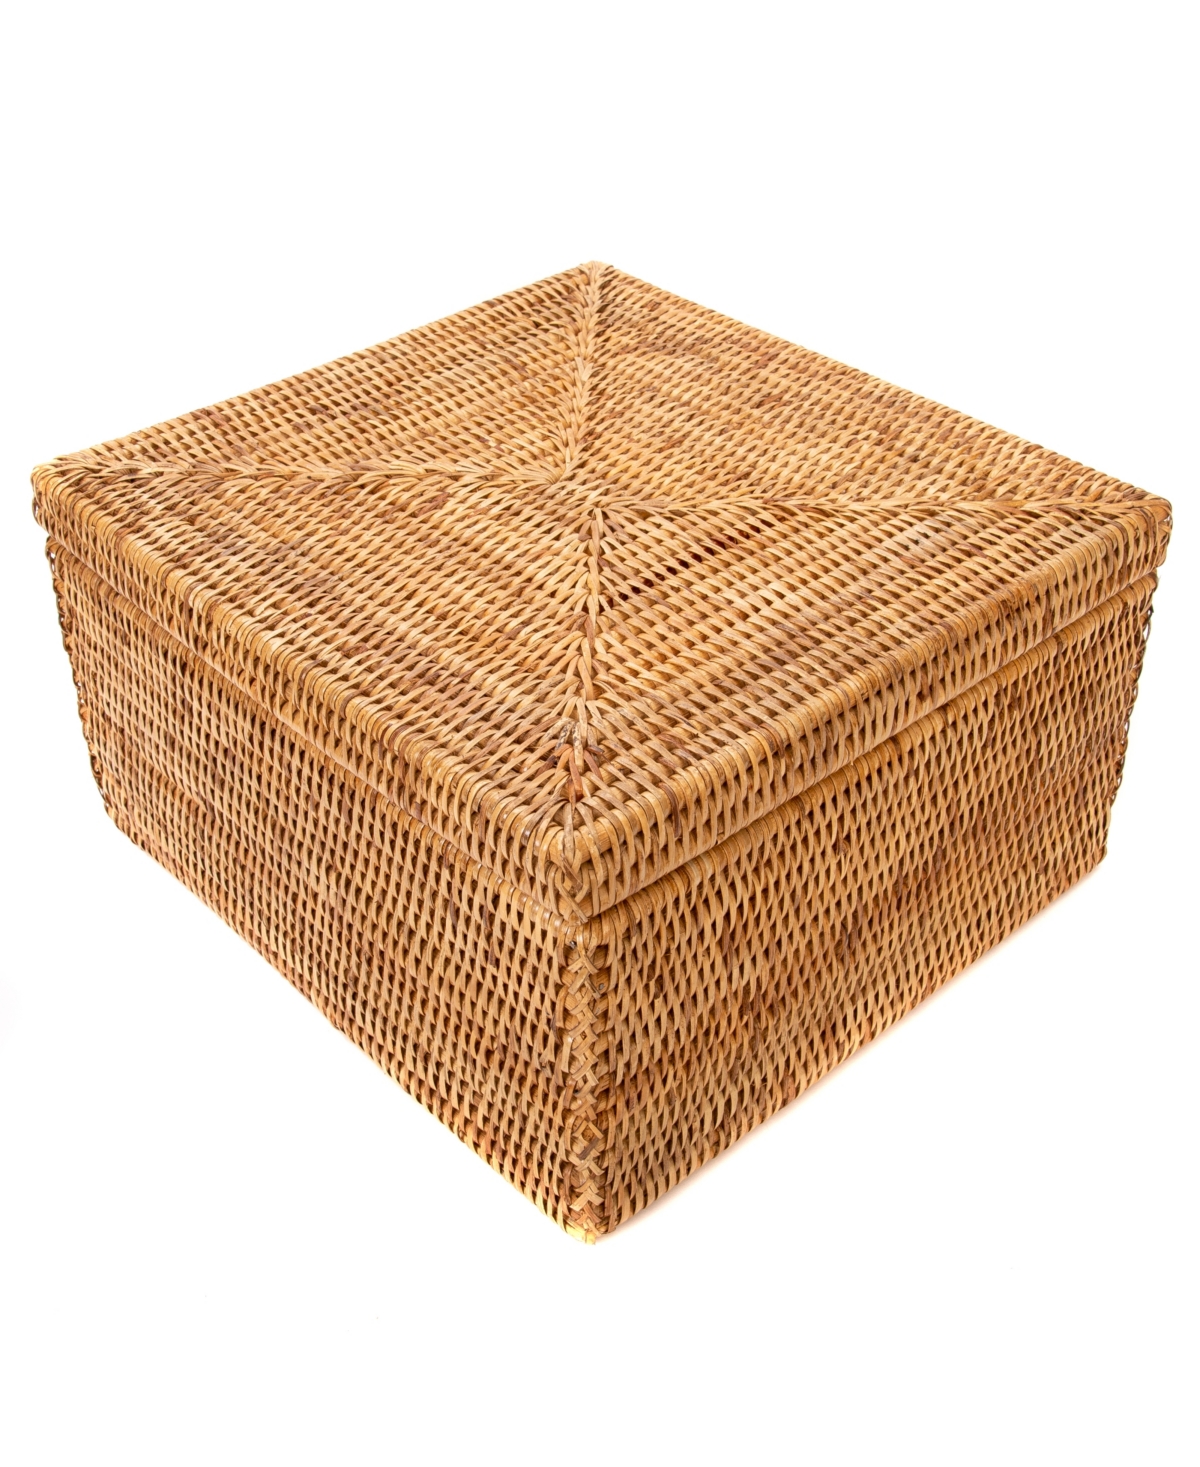 Artifacts Trading Company Artifacts Rattan Storage Box With Lid Letter File In Honey Brown